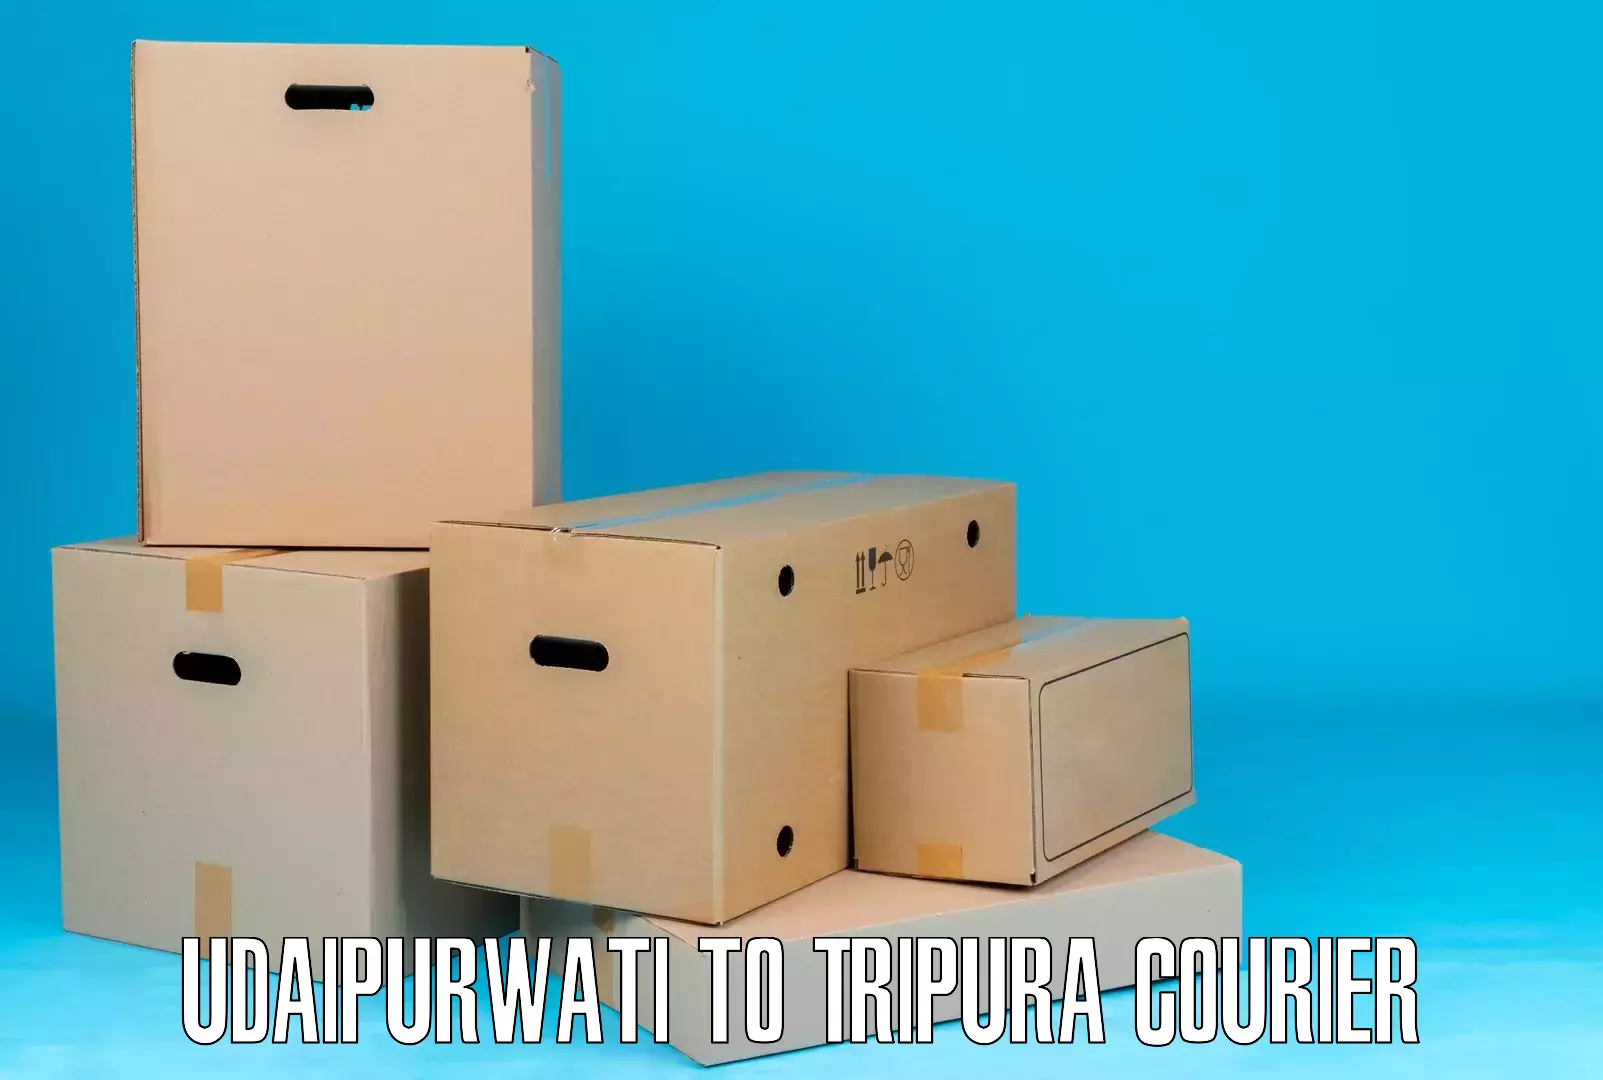 State-of-the-art courier technology Udaipurwati to Kailashahar